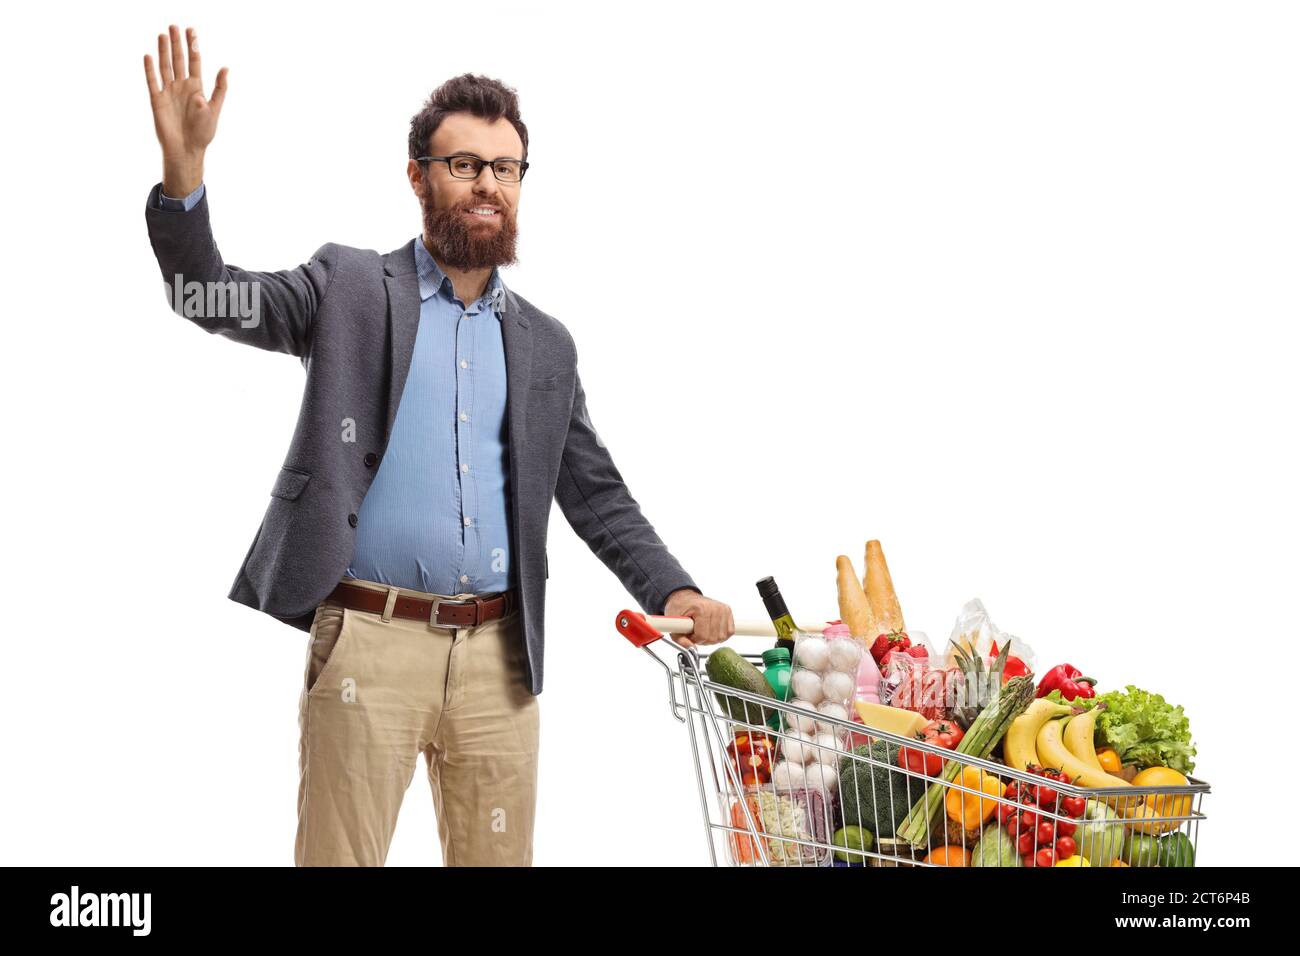 Bearded man standing with a shopping cart and waving isolated on white background Stock Photo